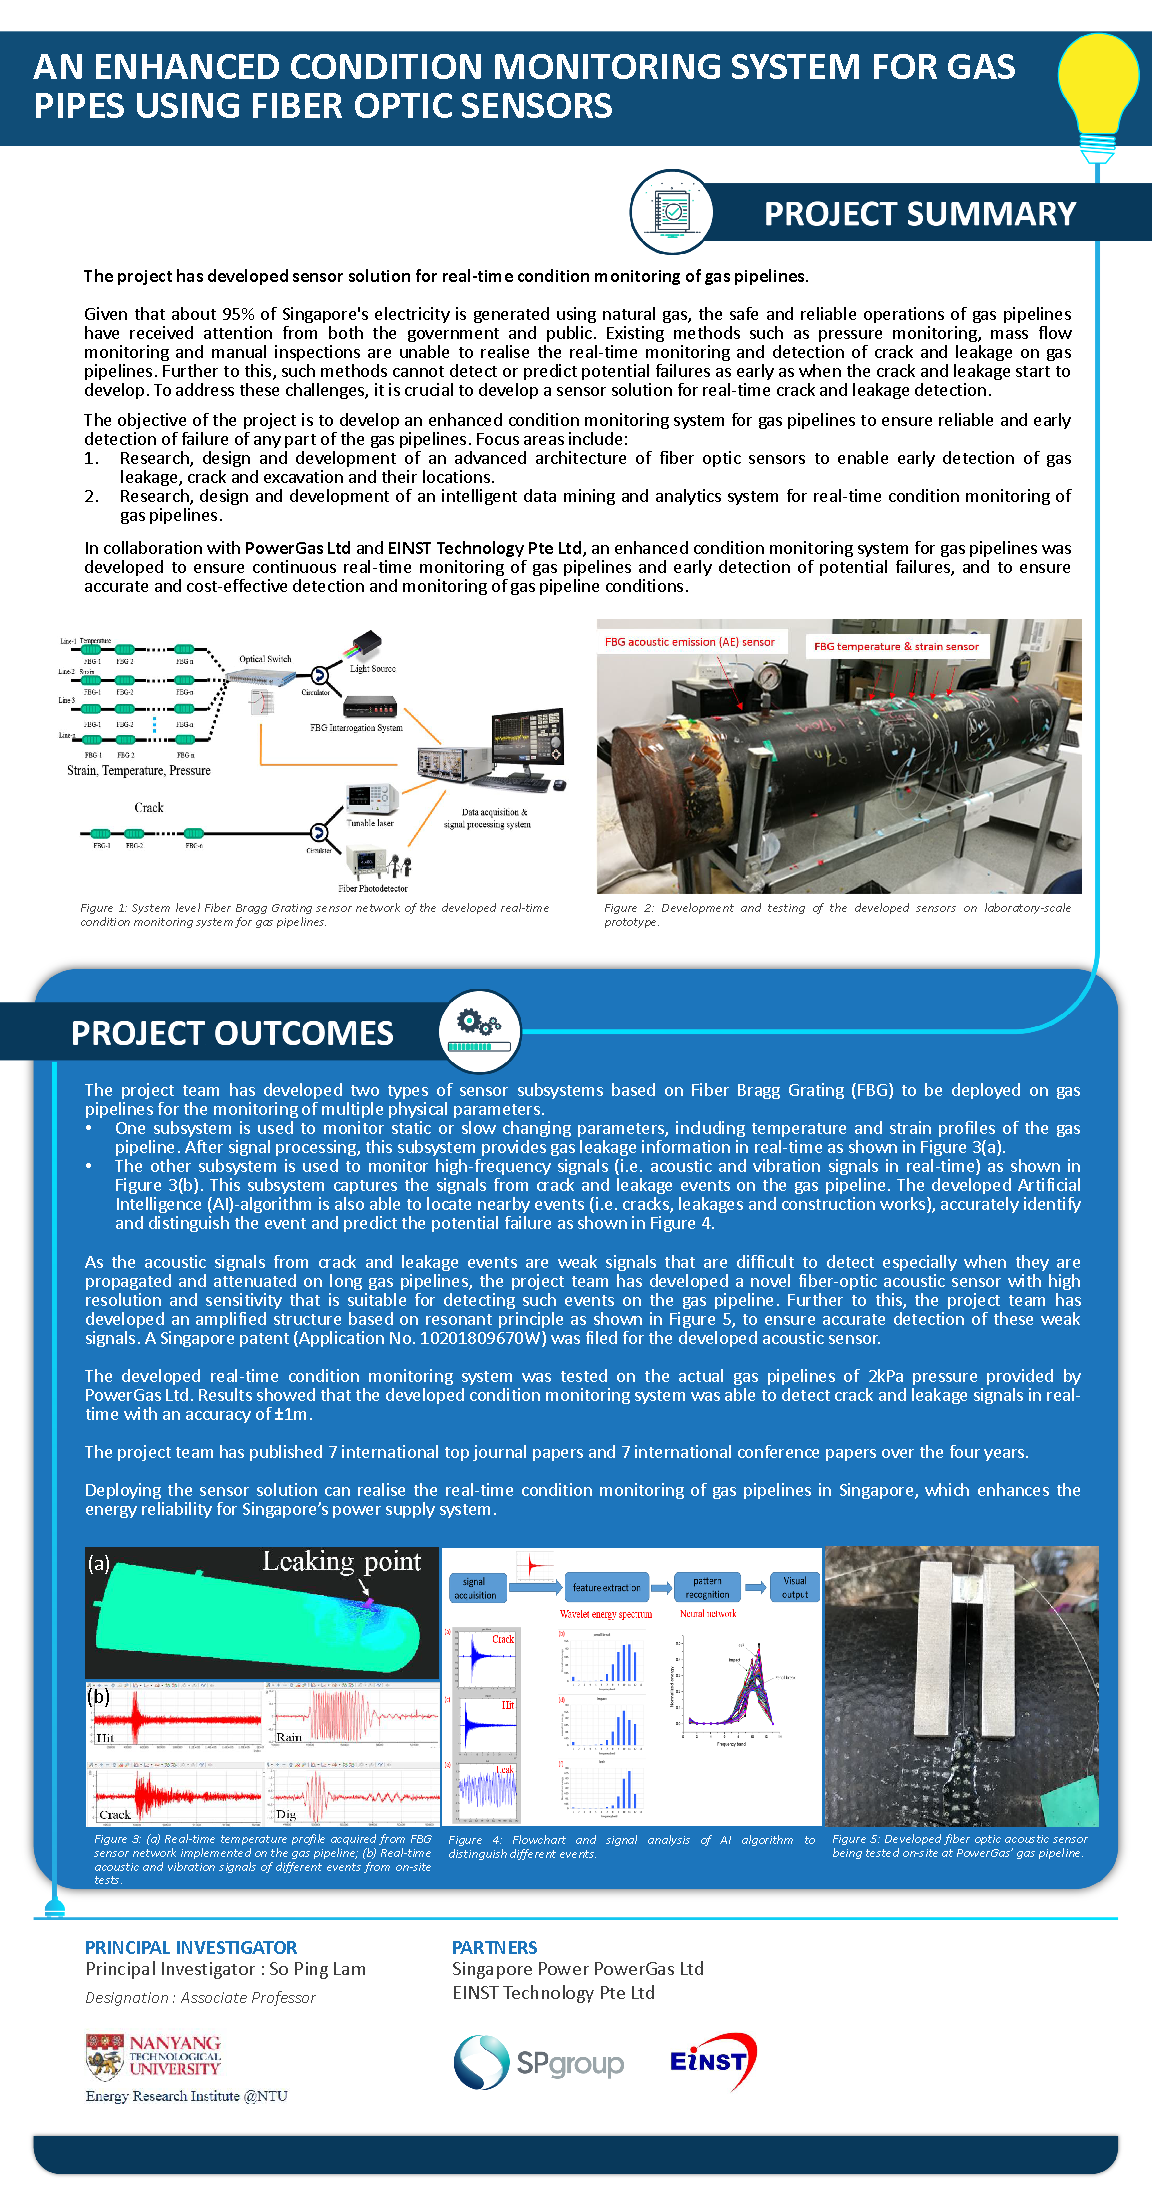 An Enhanced Condition Monitoring System For Gas Pipes Using Fiber Optic Sensors